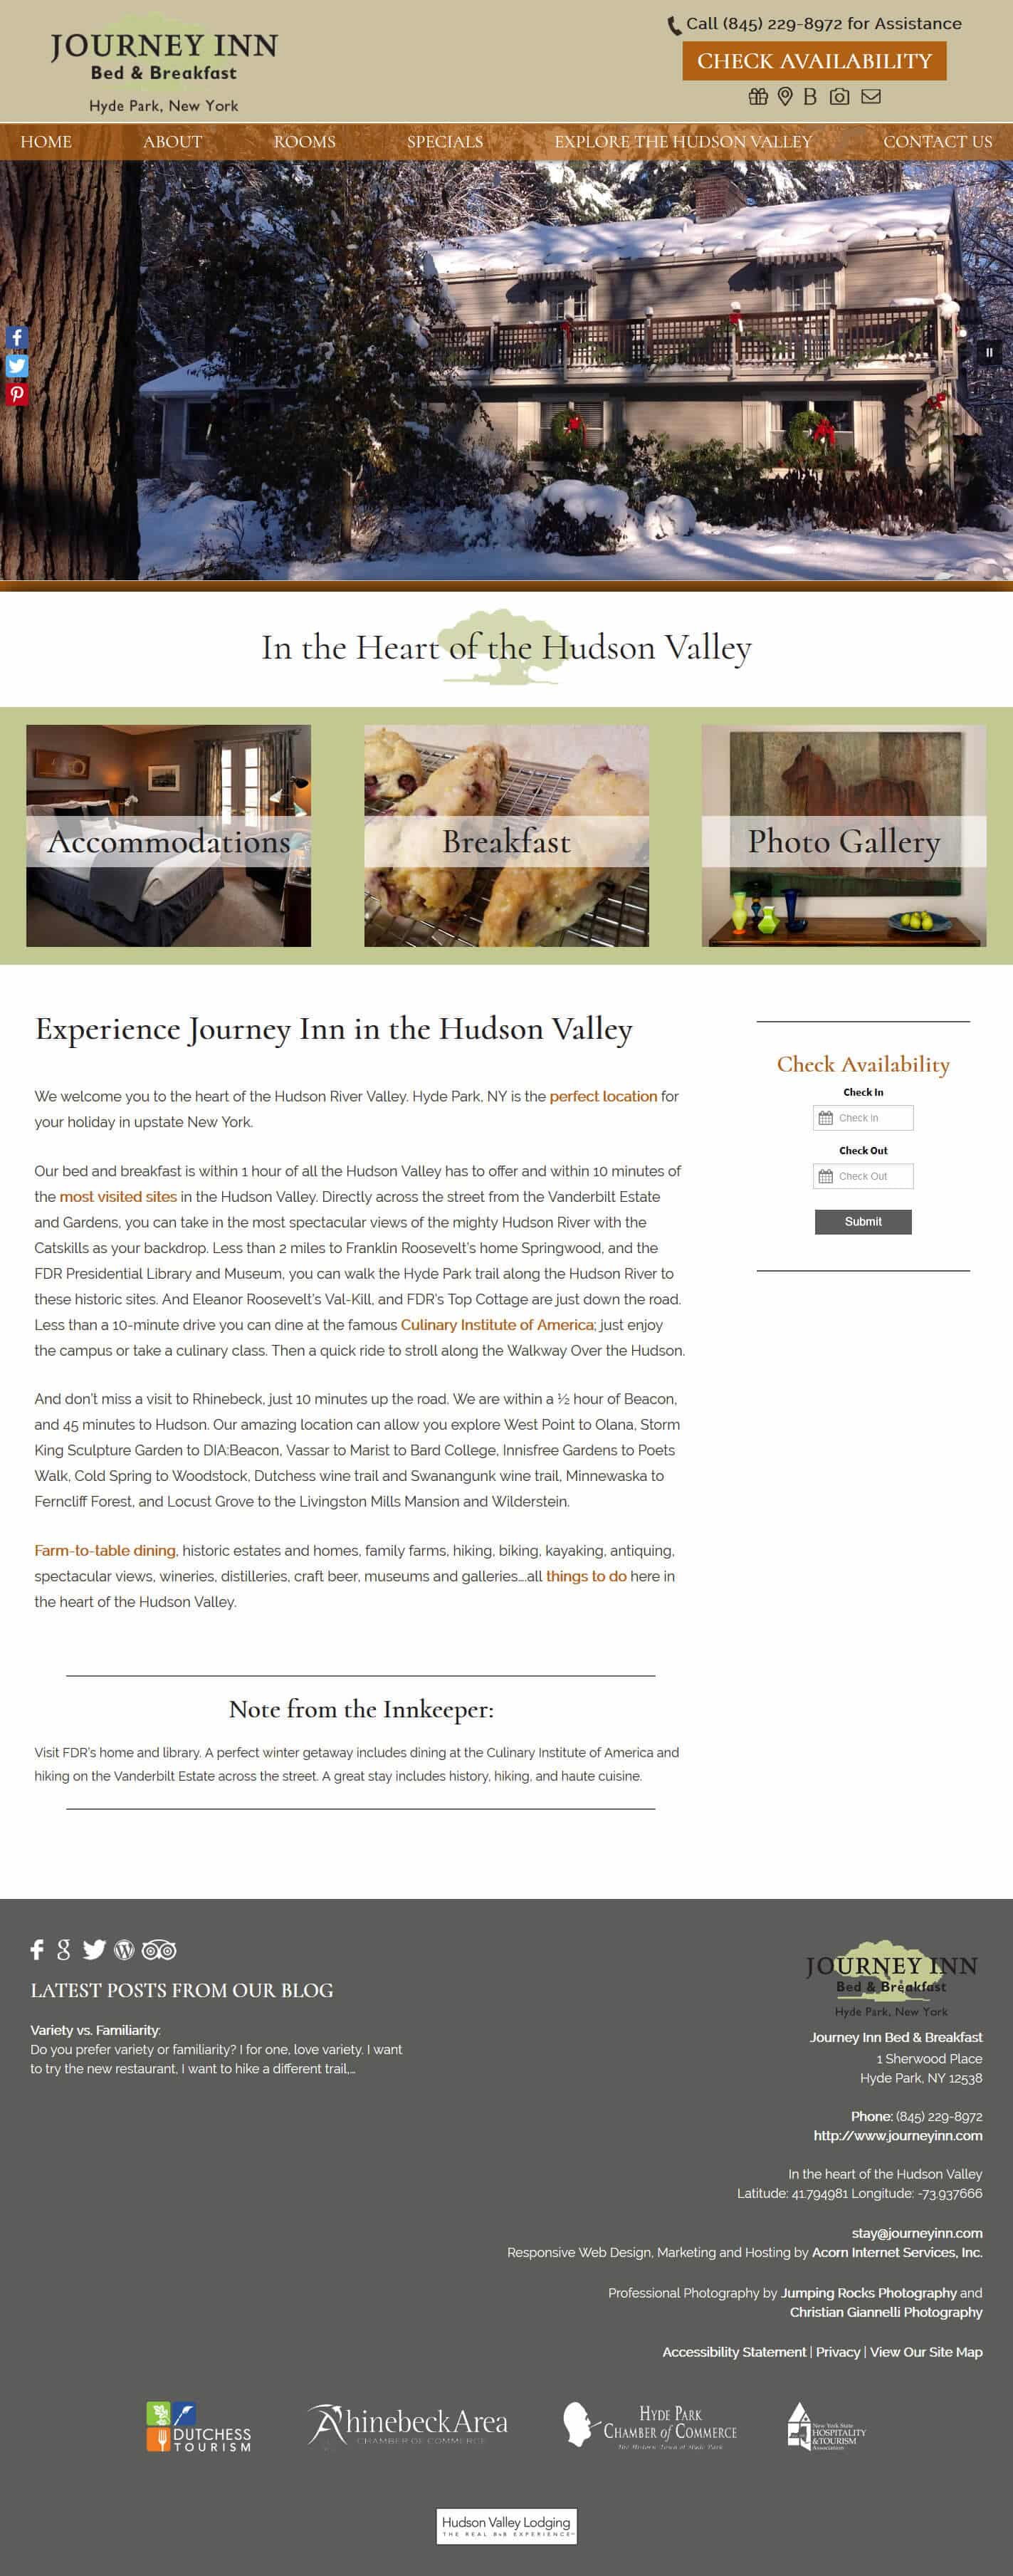 Screen capture of Journey Inn Bed & Breakfast's home page